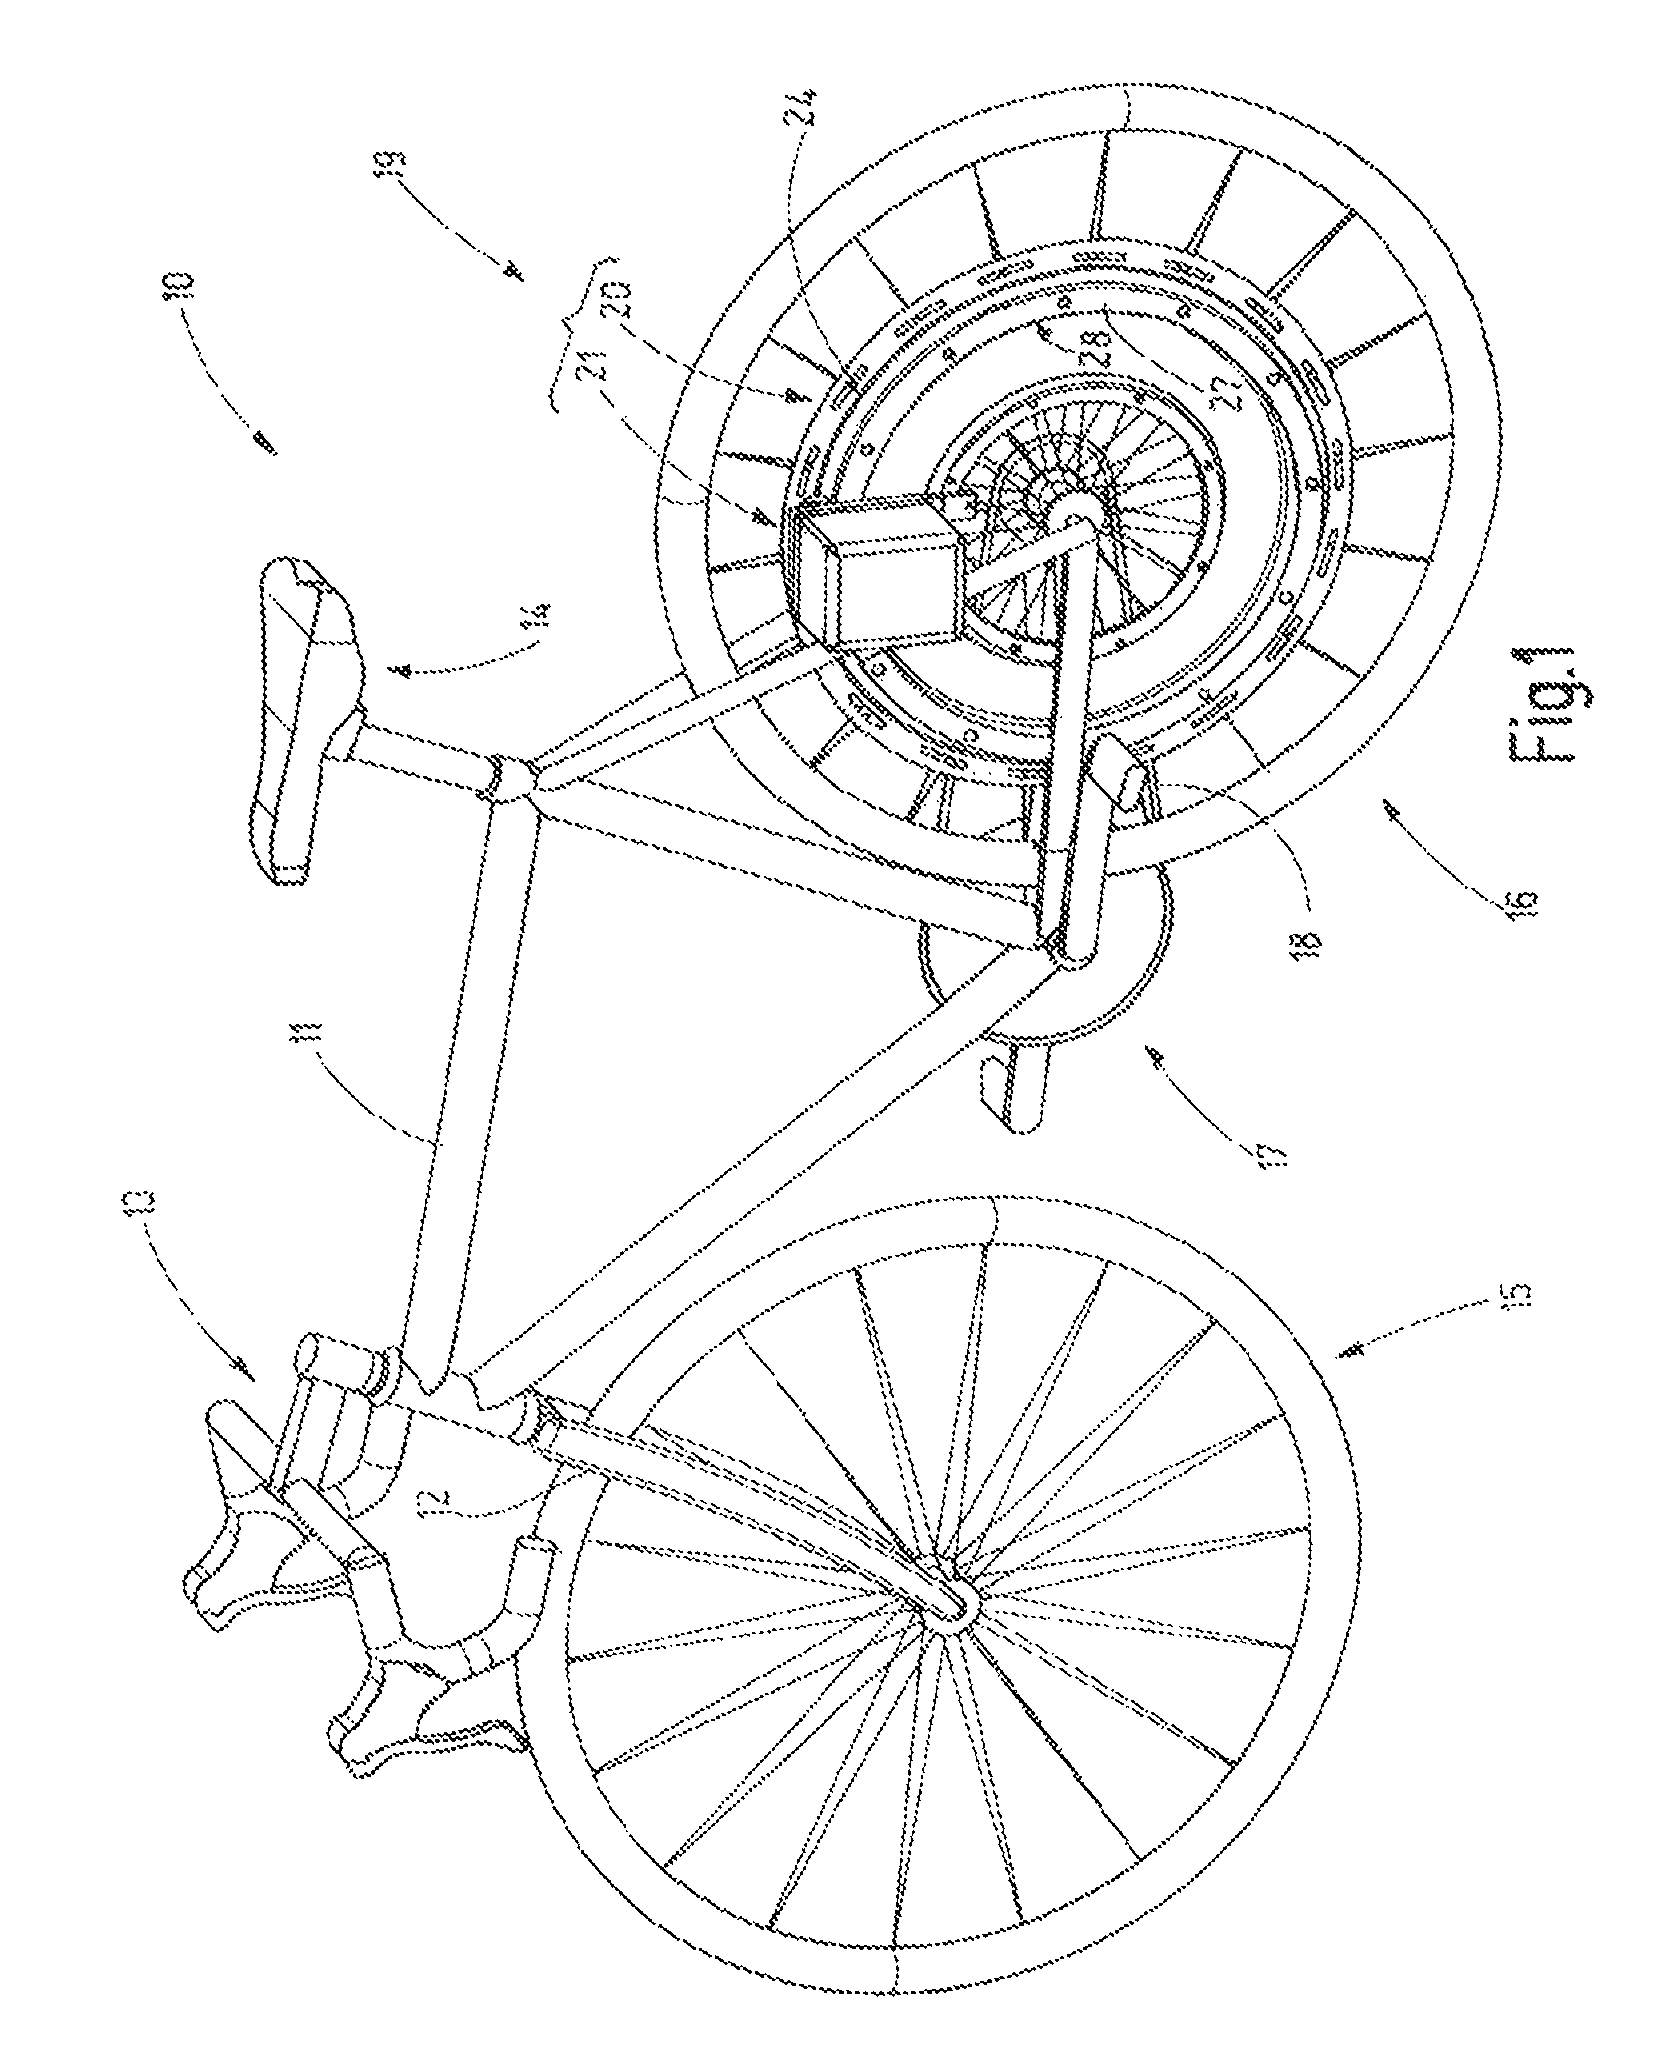 Drive unit for a vehicle wheel